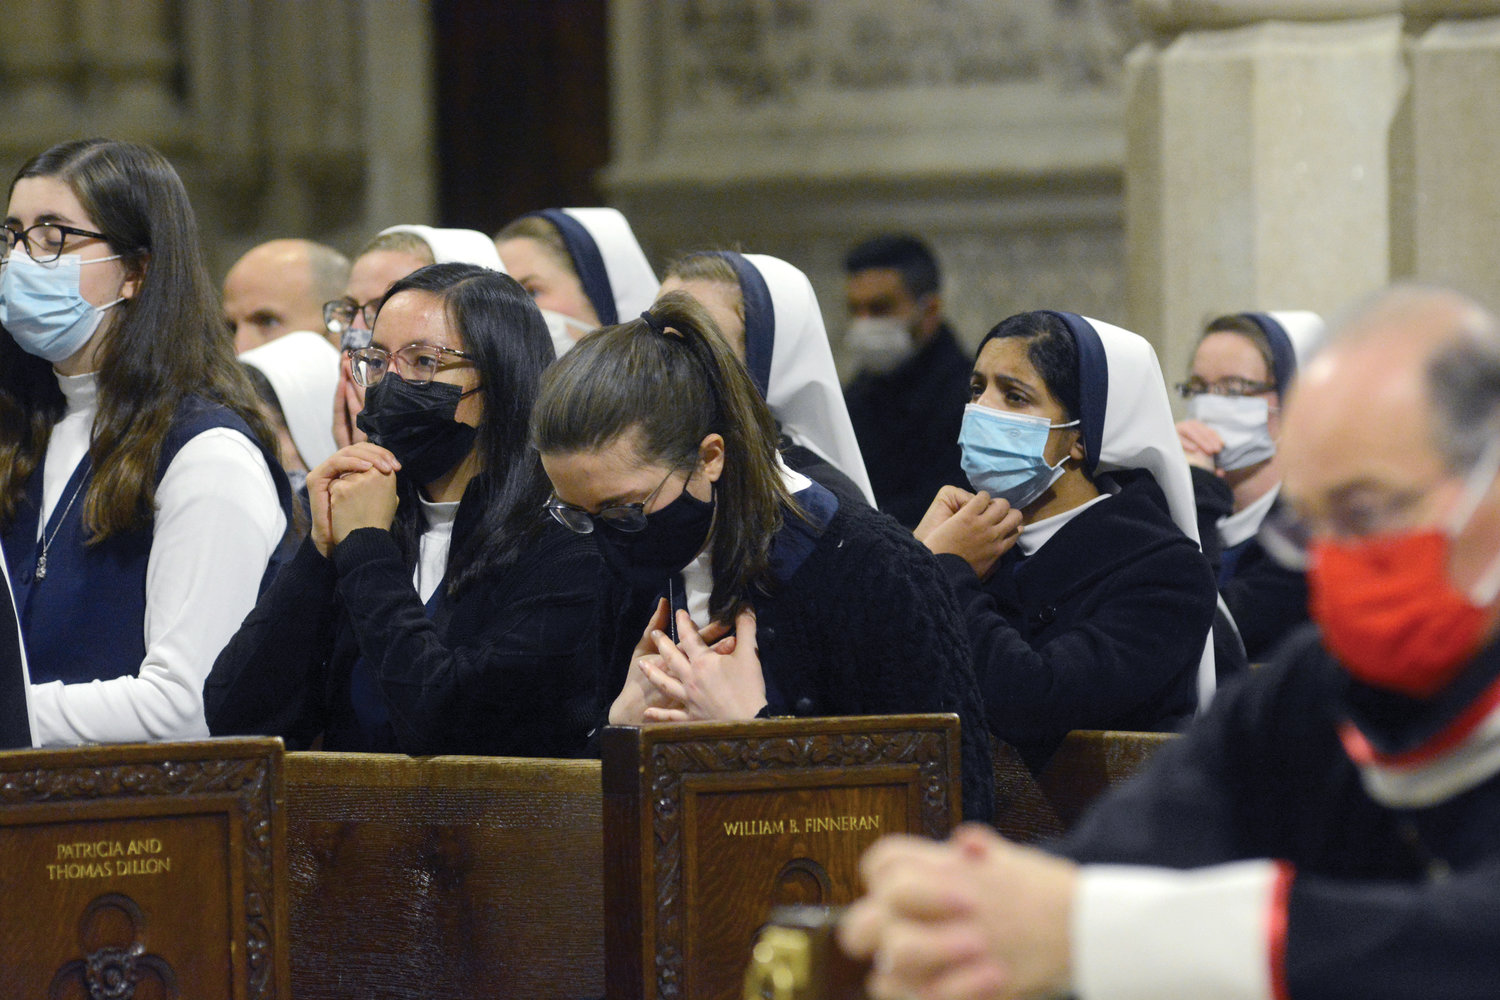 A postulant with the Sisters of Life clutches her heart in prayer. A man and a woman pray in a pew.